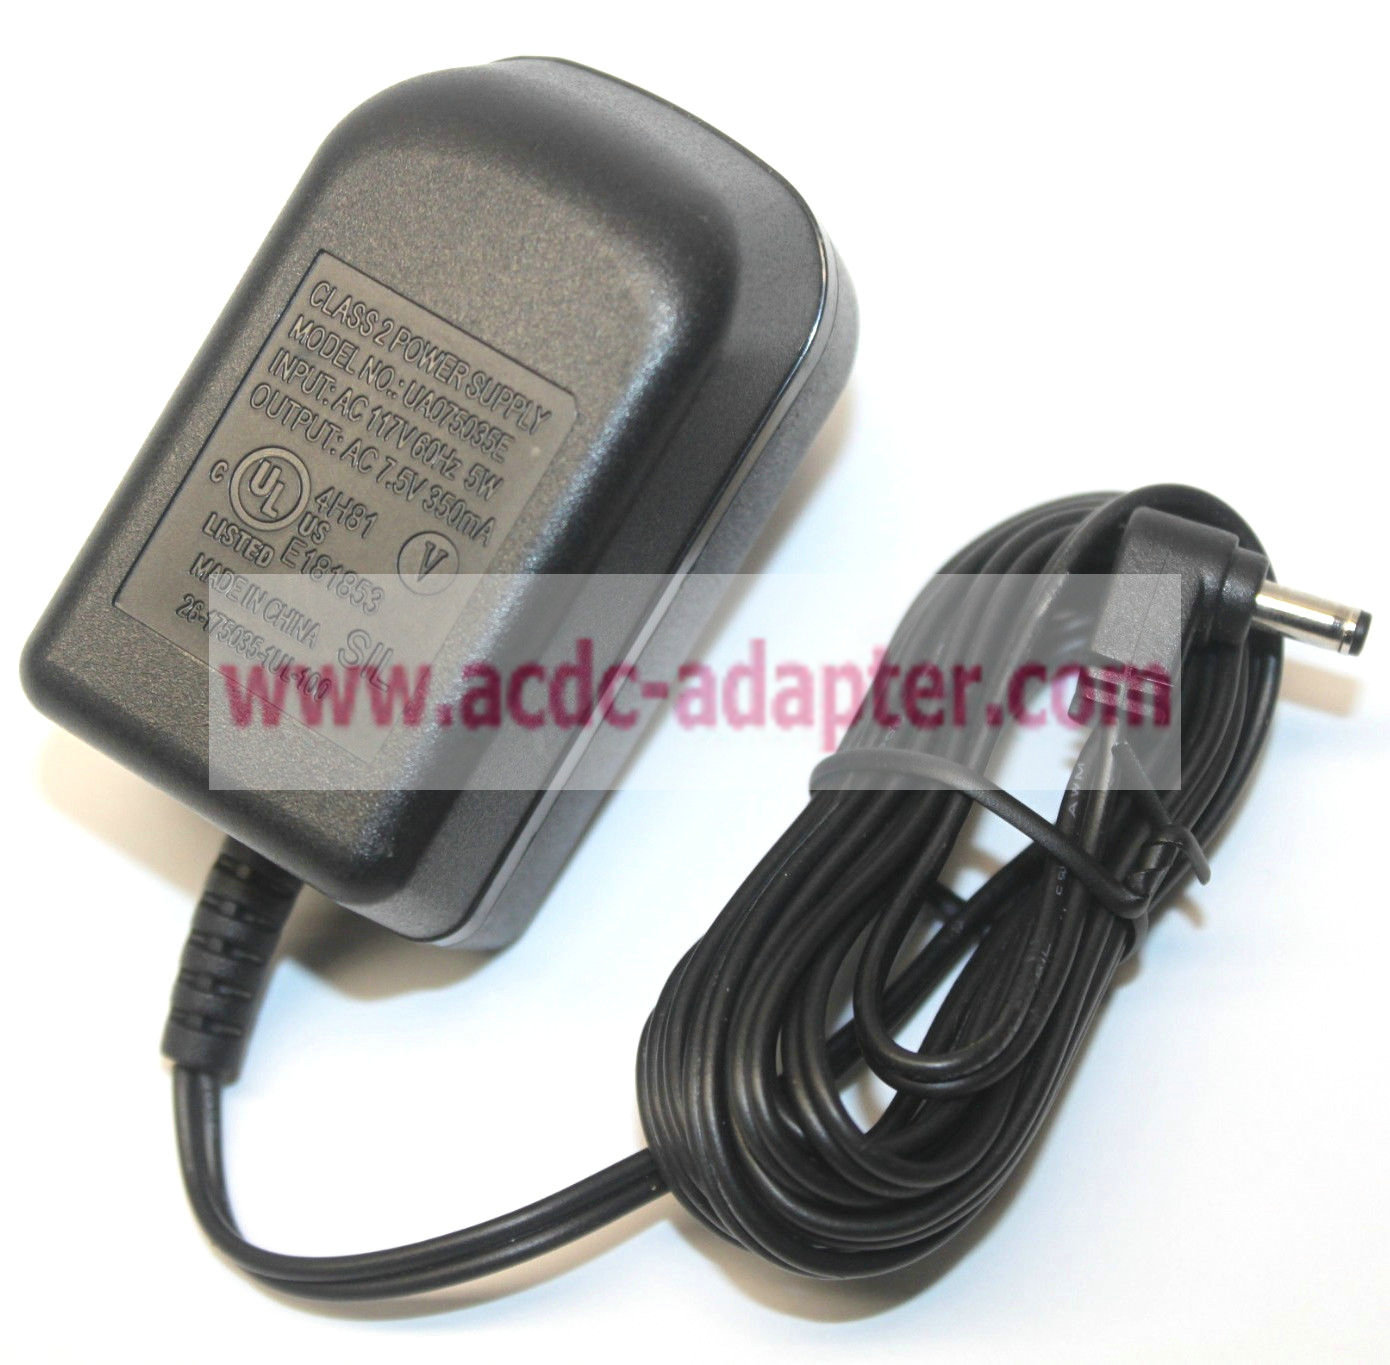 New 7.5V AC 350mA AC Adapter UA075035E Class 2 Power Supply Wall Plug-In Charger - Click Image to Close